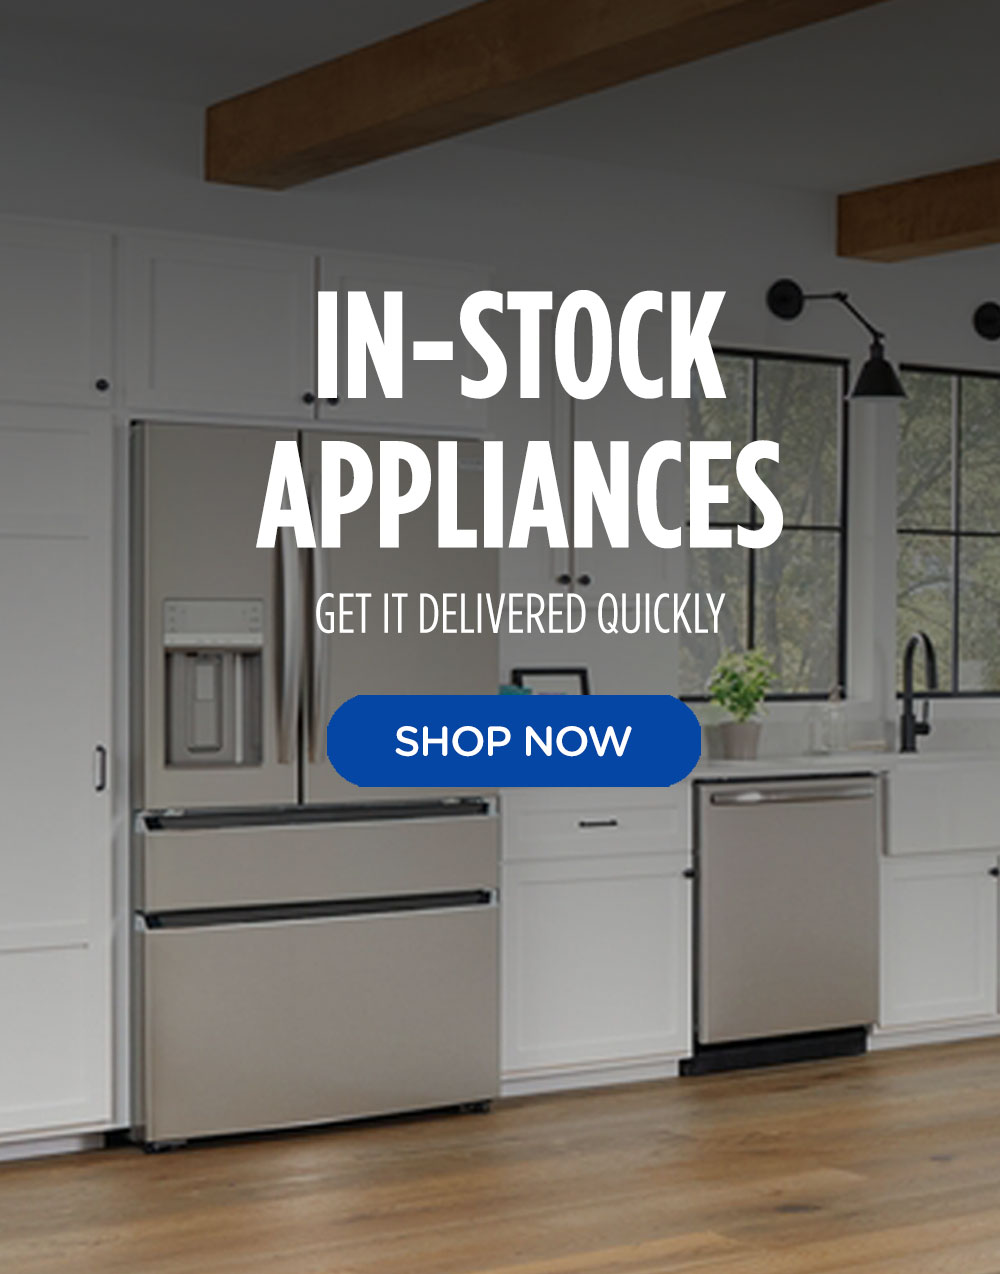 In-stock appliances. Get it delived quickly. Shop now